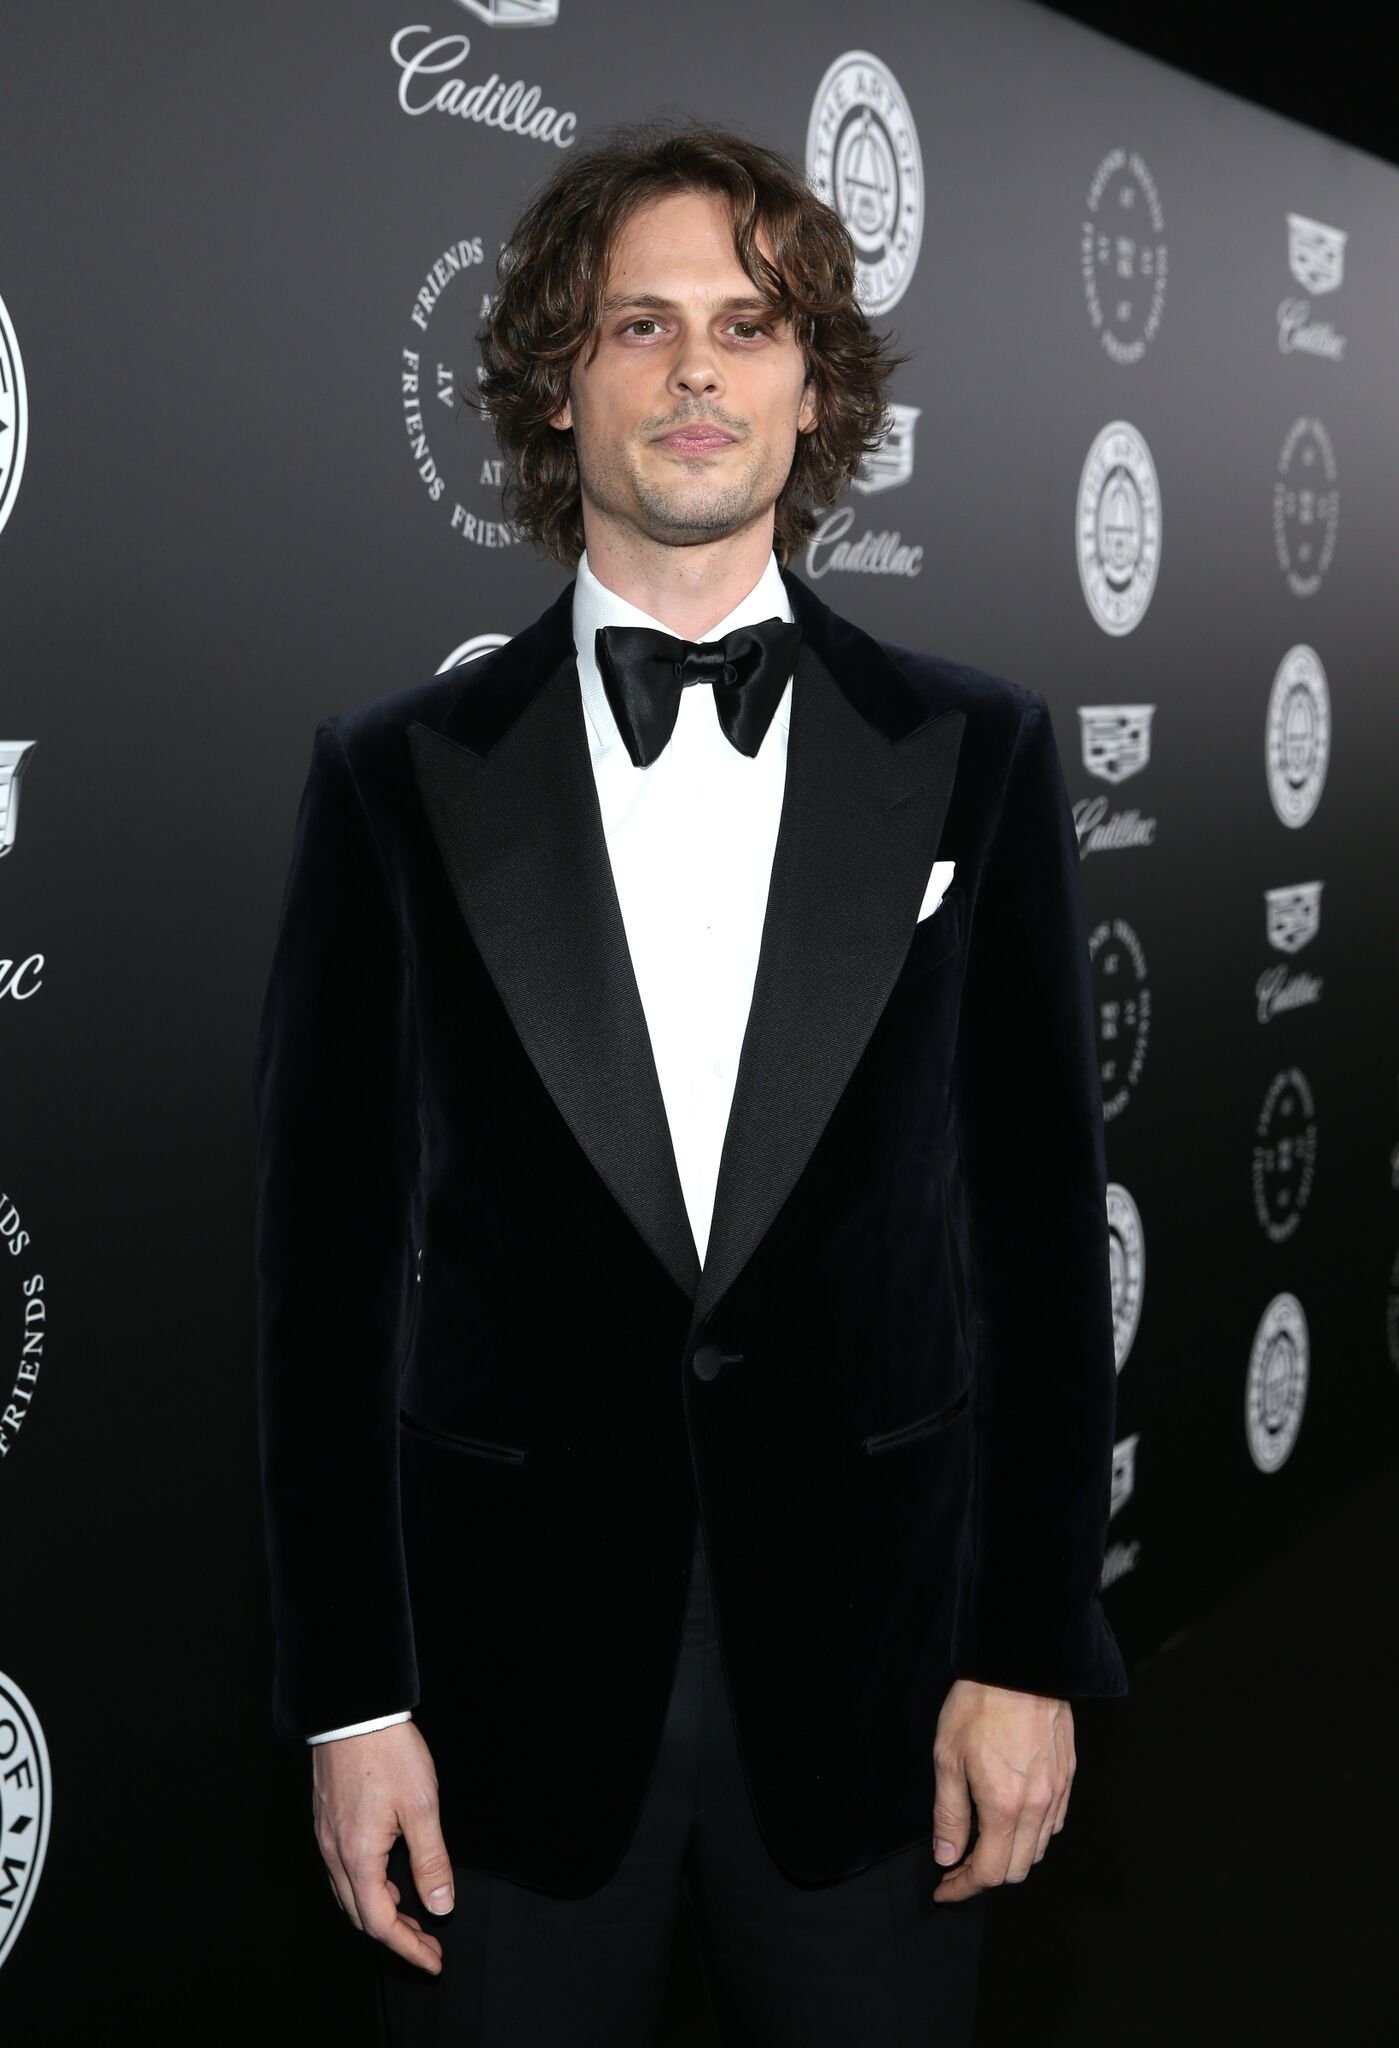 Matthew Gray Gubler attends The Art Of Elysium's 11th Annual Celebration with John Legend at Barker Hangar | Getty Images